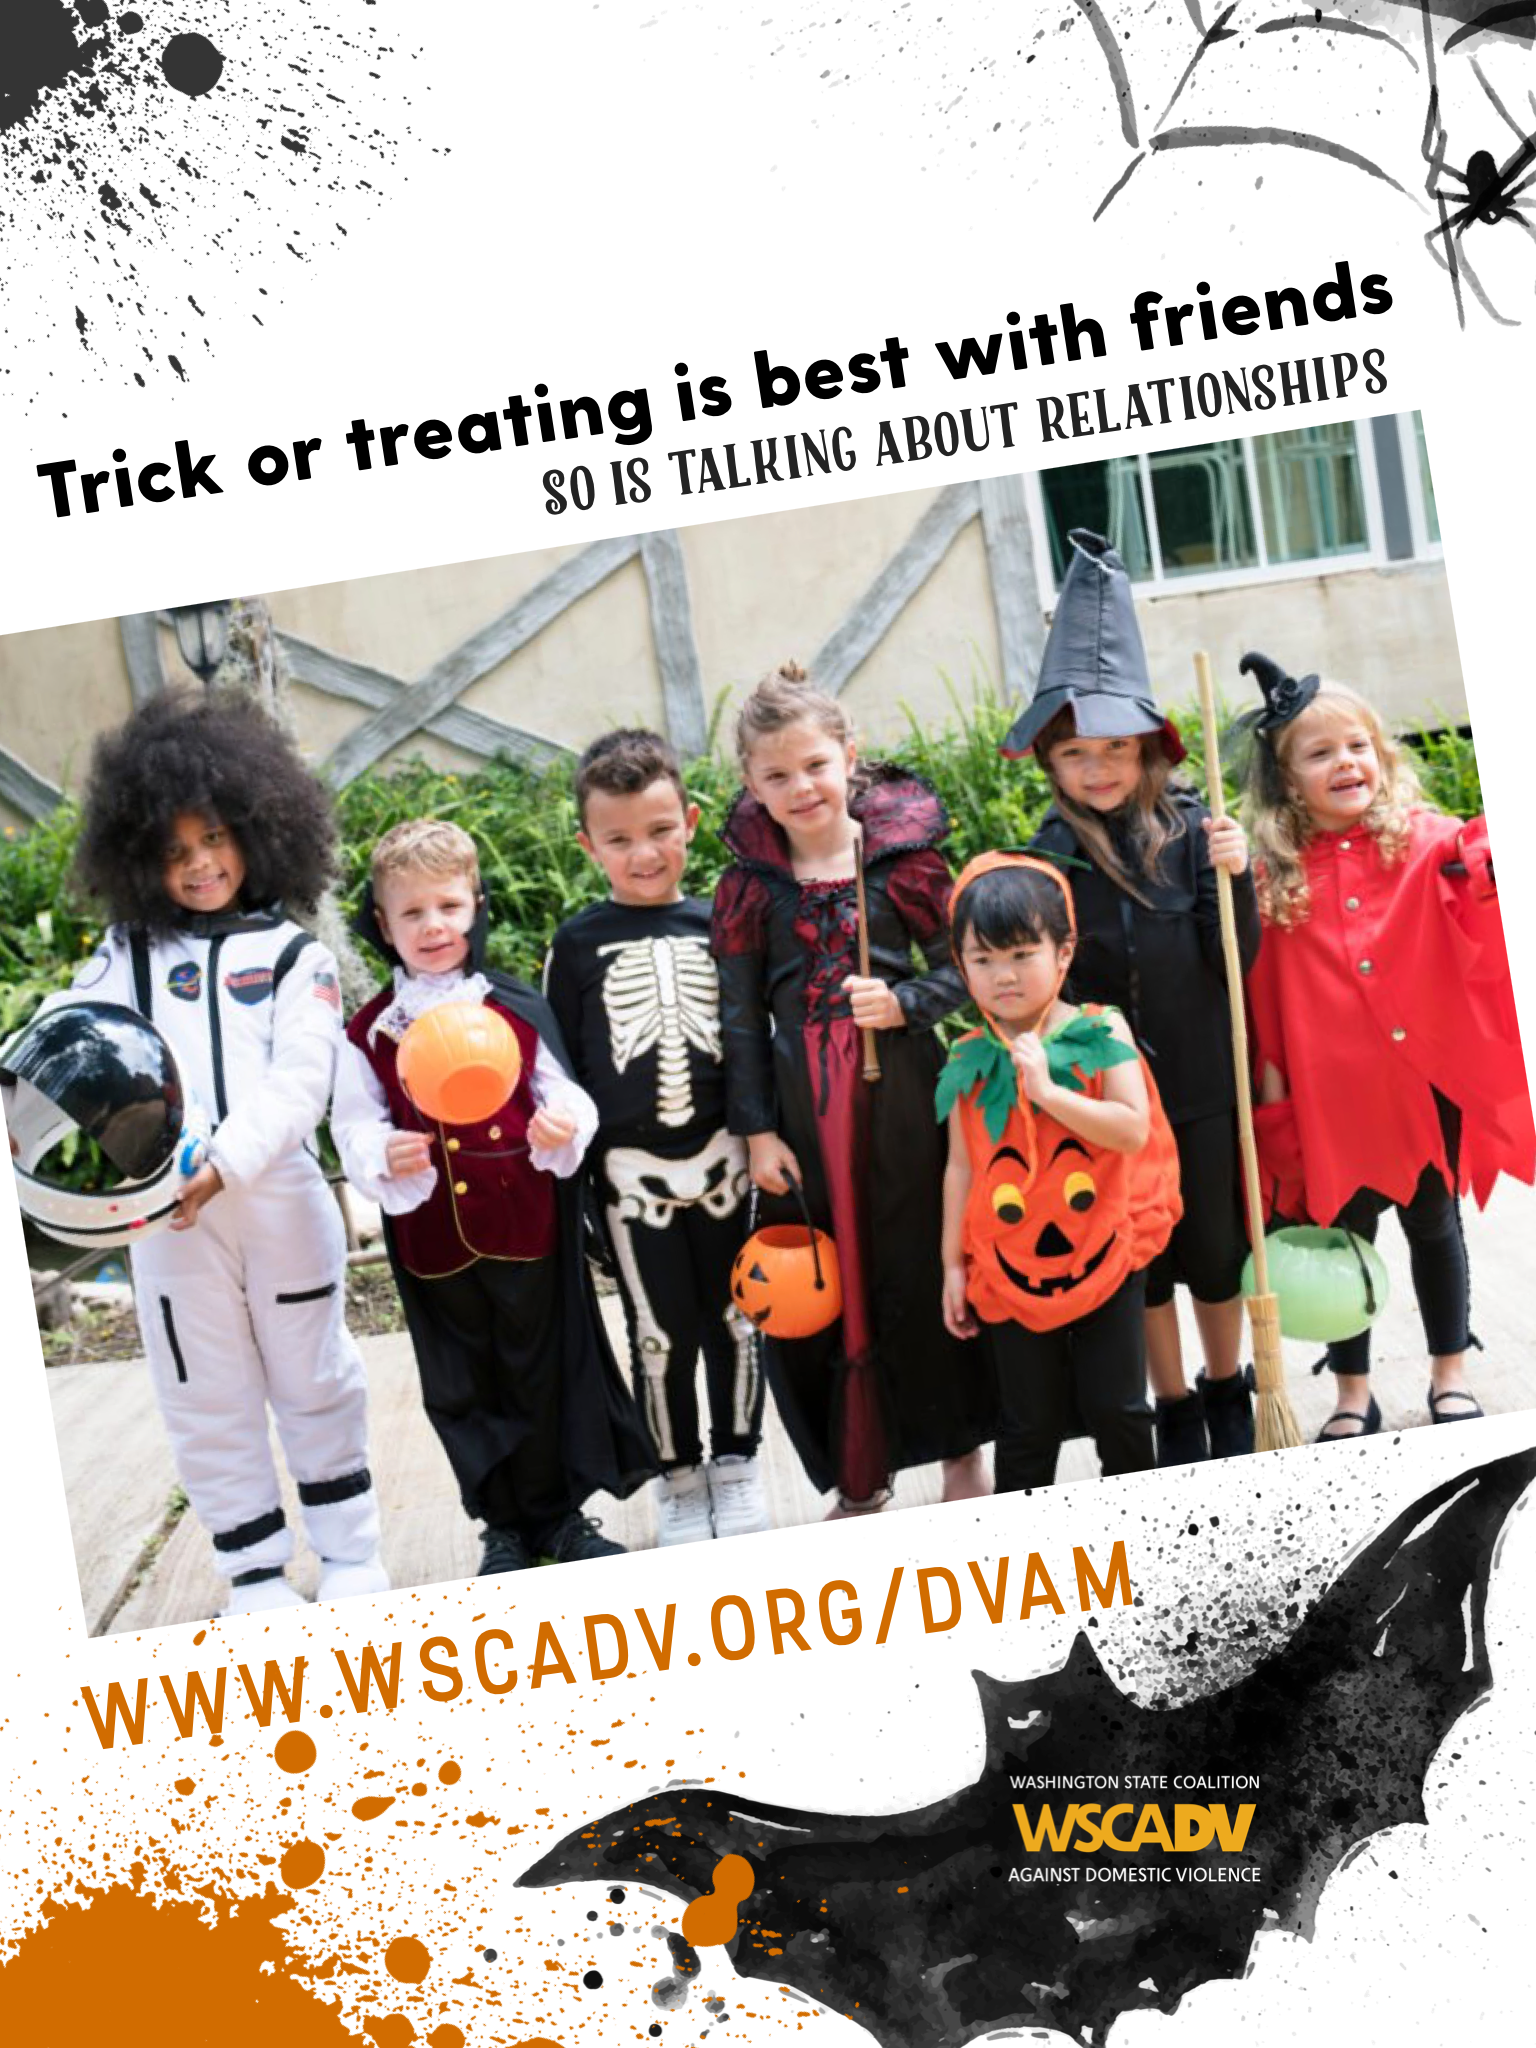 Halloween themed image for Domestic Violence Action Month. There is a photo of a group of children in halloween costumes smiling as they trick or treat. Above the photo is text that reads: Trick or treating is best with friends, so is talking about relationships. Underneath the photo is a bat and the url www.wscadv.org/dvam